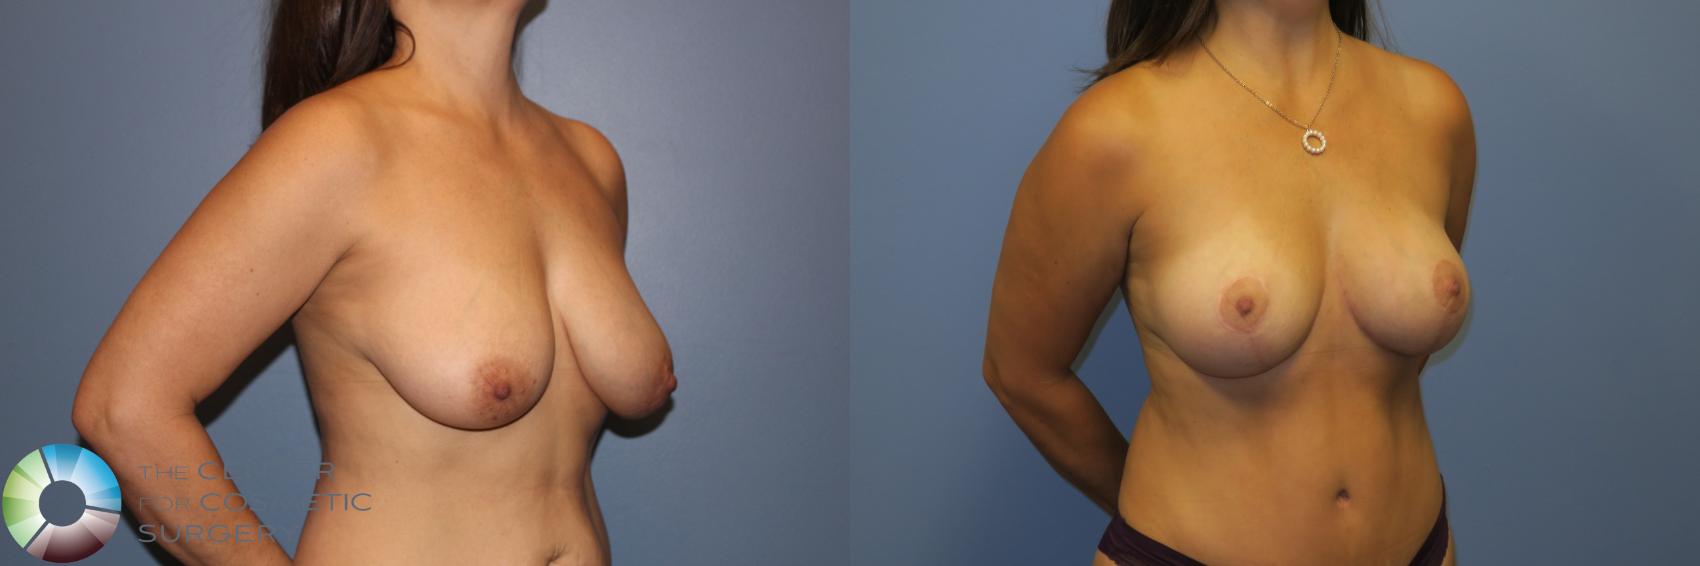 Before & After Mommy Makeover Case 11309 Right Oblique View in Golden, CO